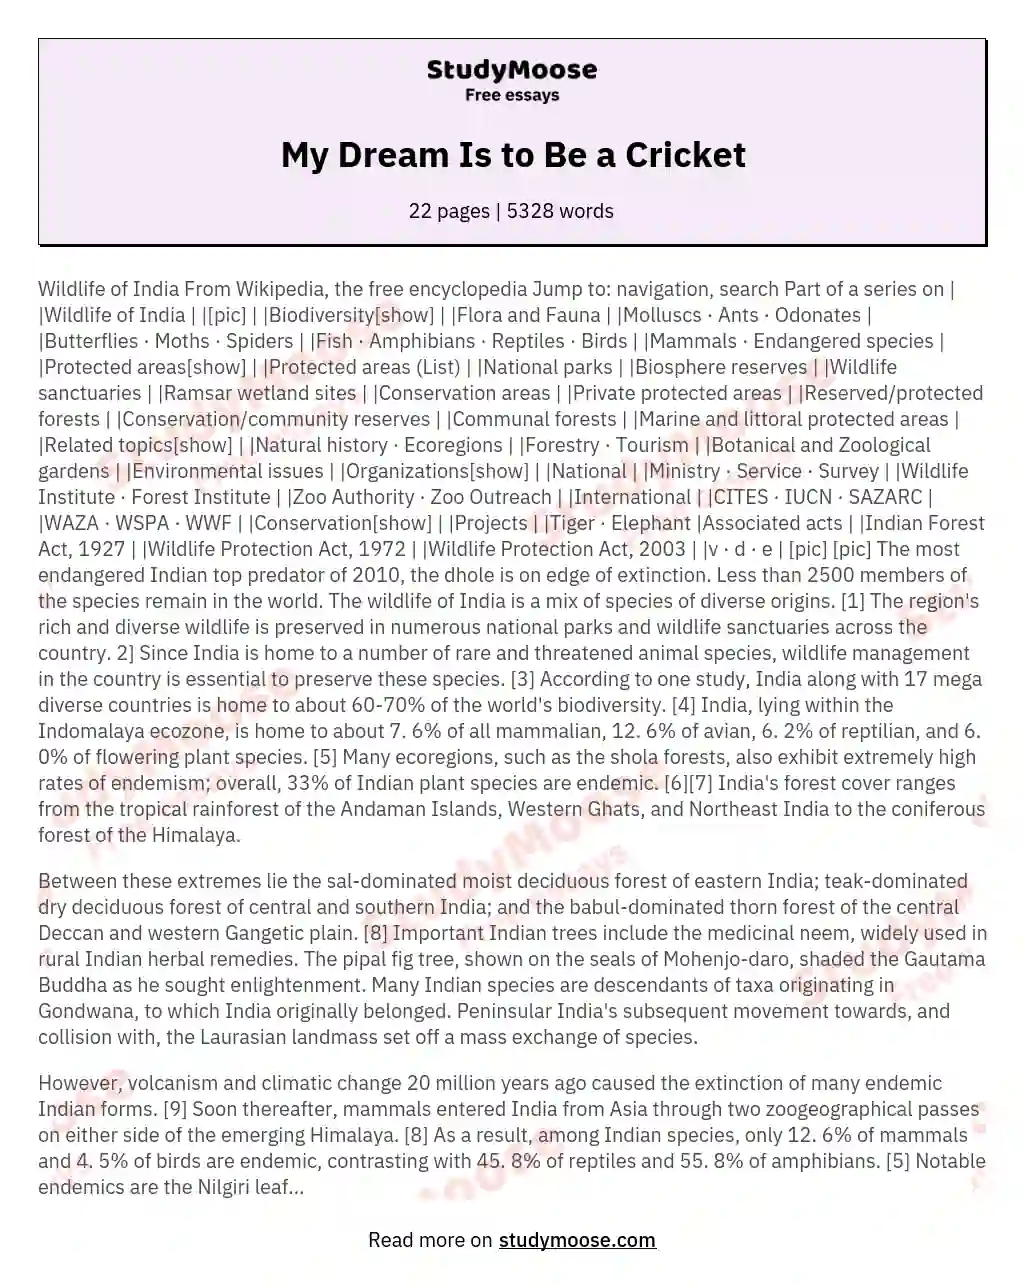 My Dream Is to Be a Cricket